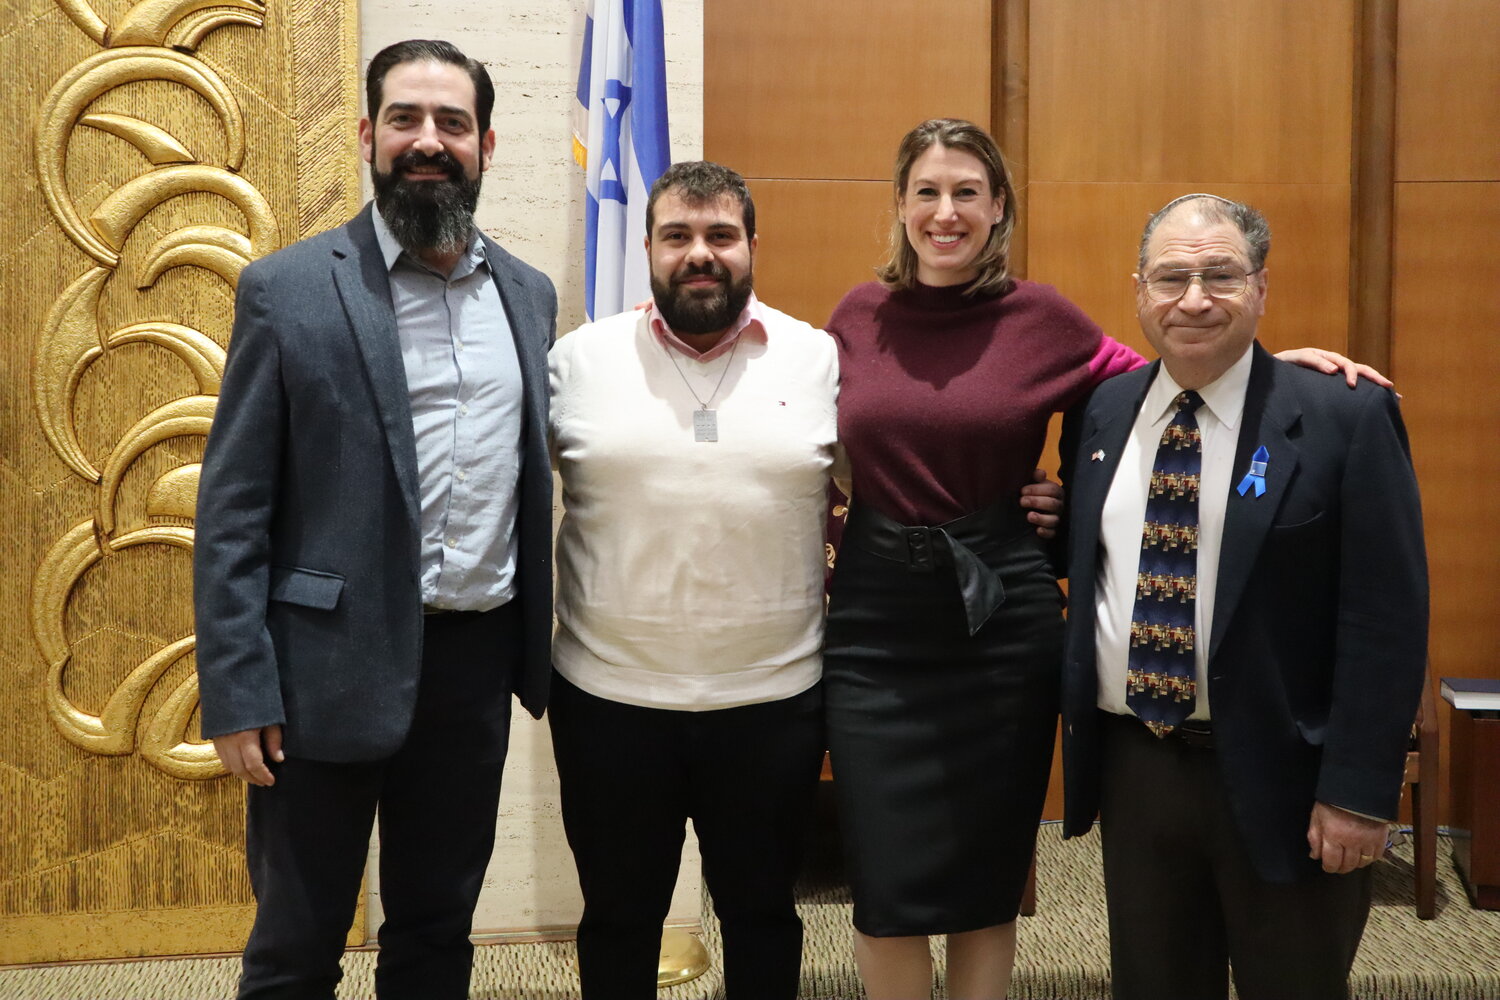 Rabbi David Lerner, left, invites Amit Yaacov, a human resources officer with the Israeli Defense Forces, to discuss his experiences in the Gaza Strip at Shabbat services last Friday night at Congregation B’nai Sholom-Beth David in Rockville Centre. They are joined by Cantor Alexandra Weiser and Board Chairman Ira Salwen.